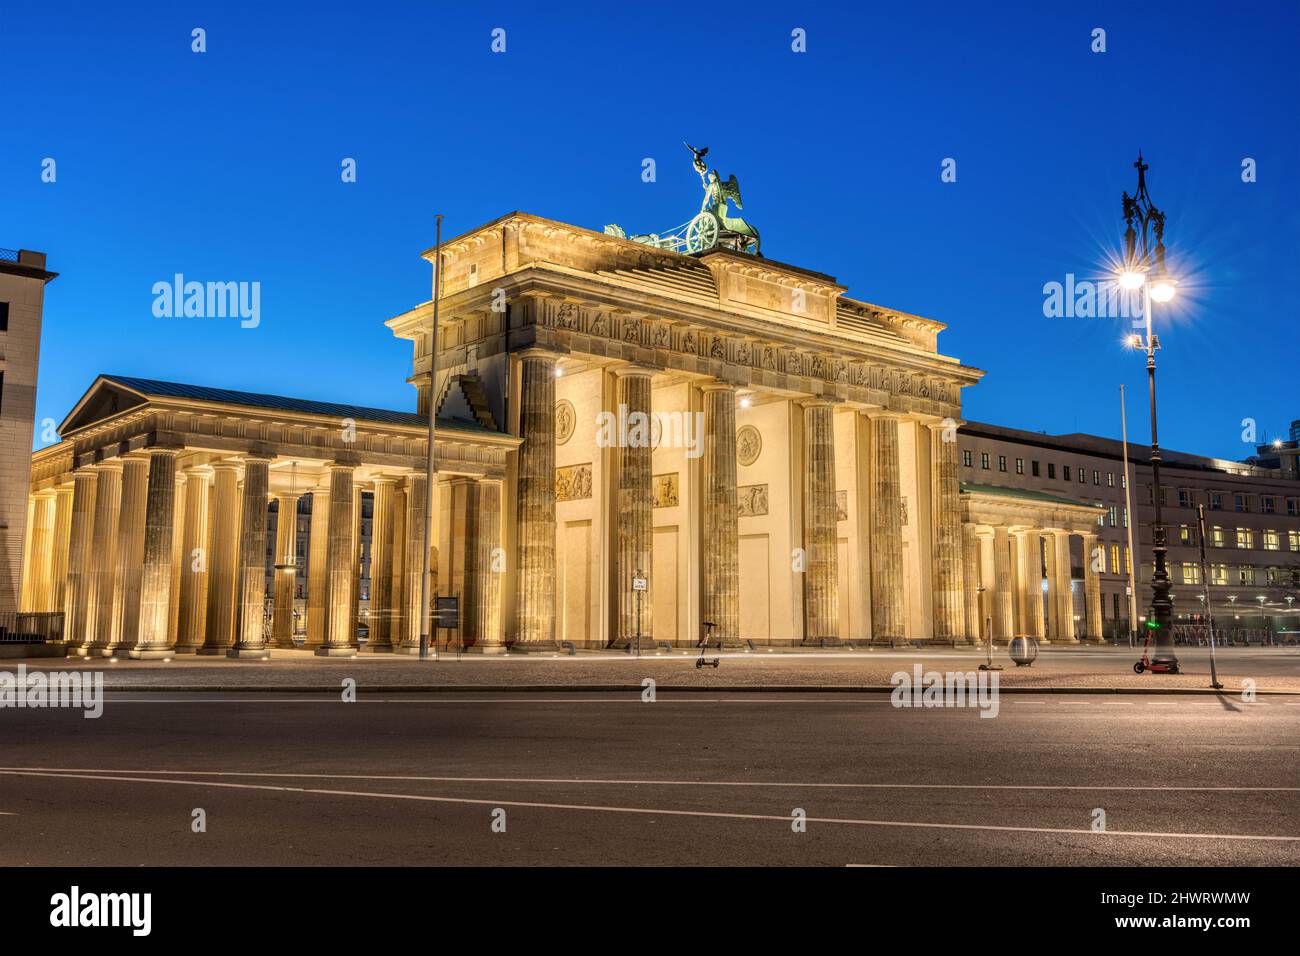 The backside of the illuminated Brandenburg Gate in Berlin at dawn Stock Photo